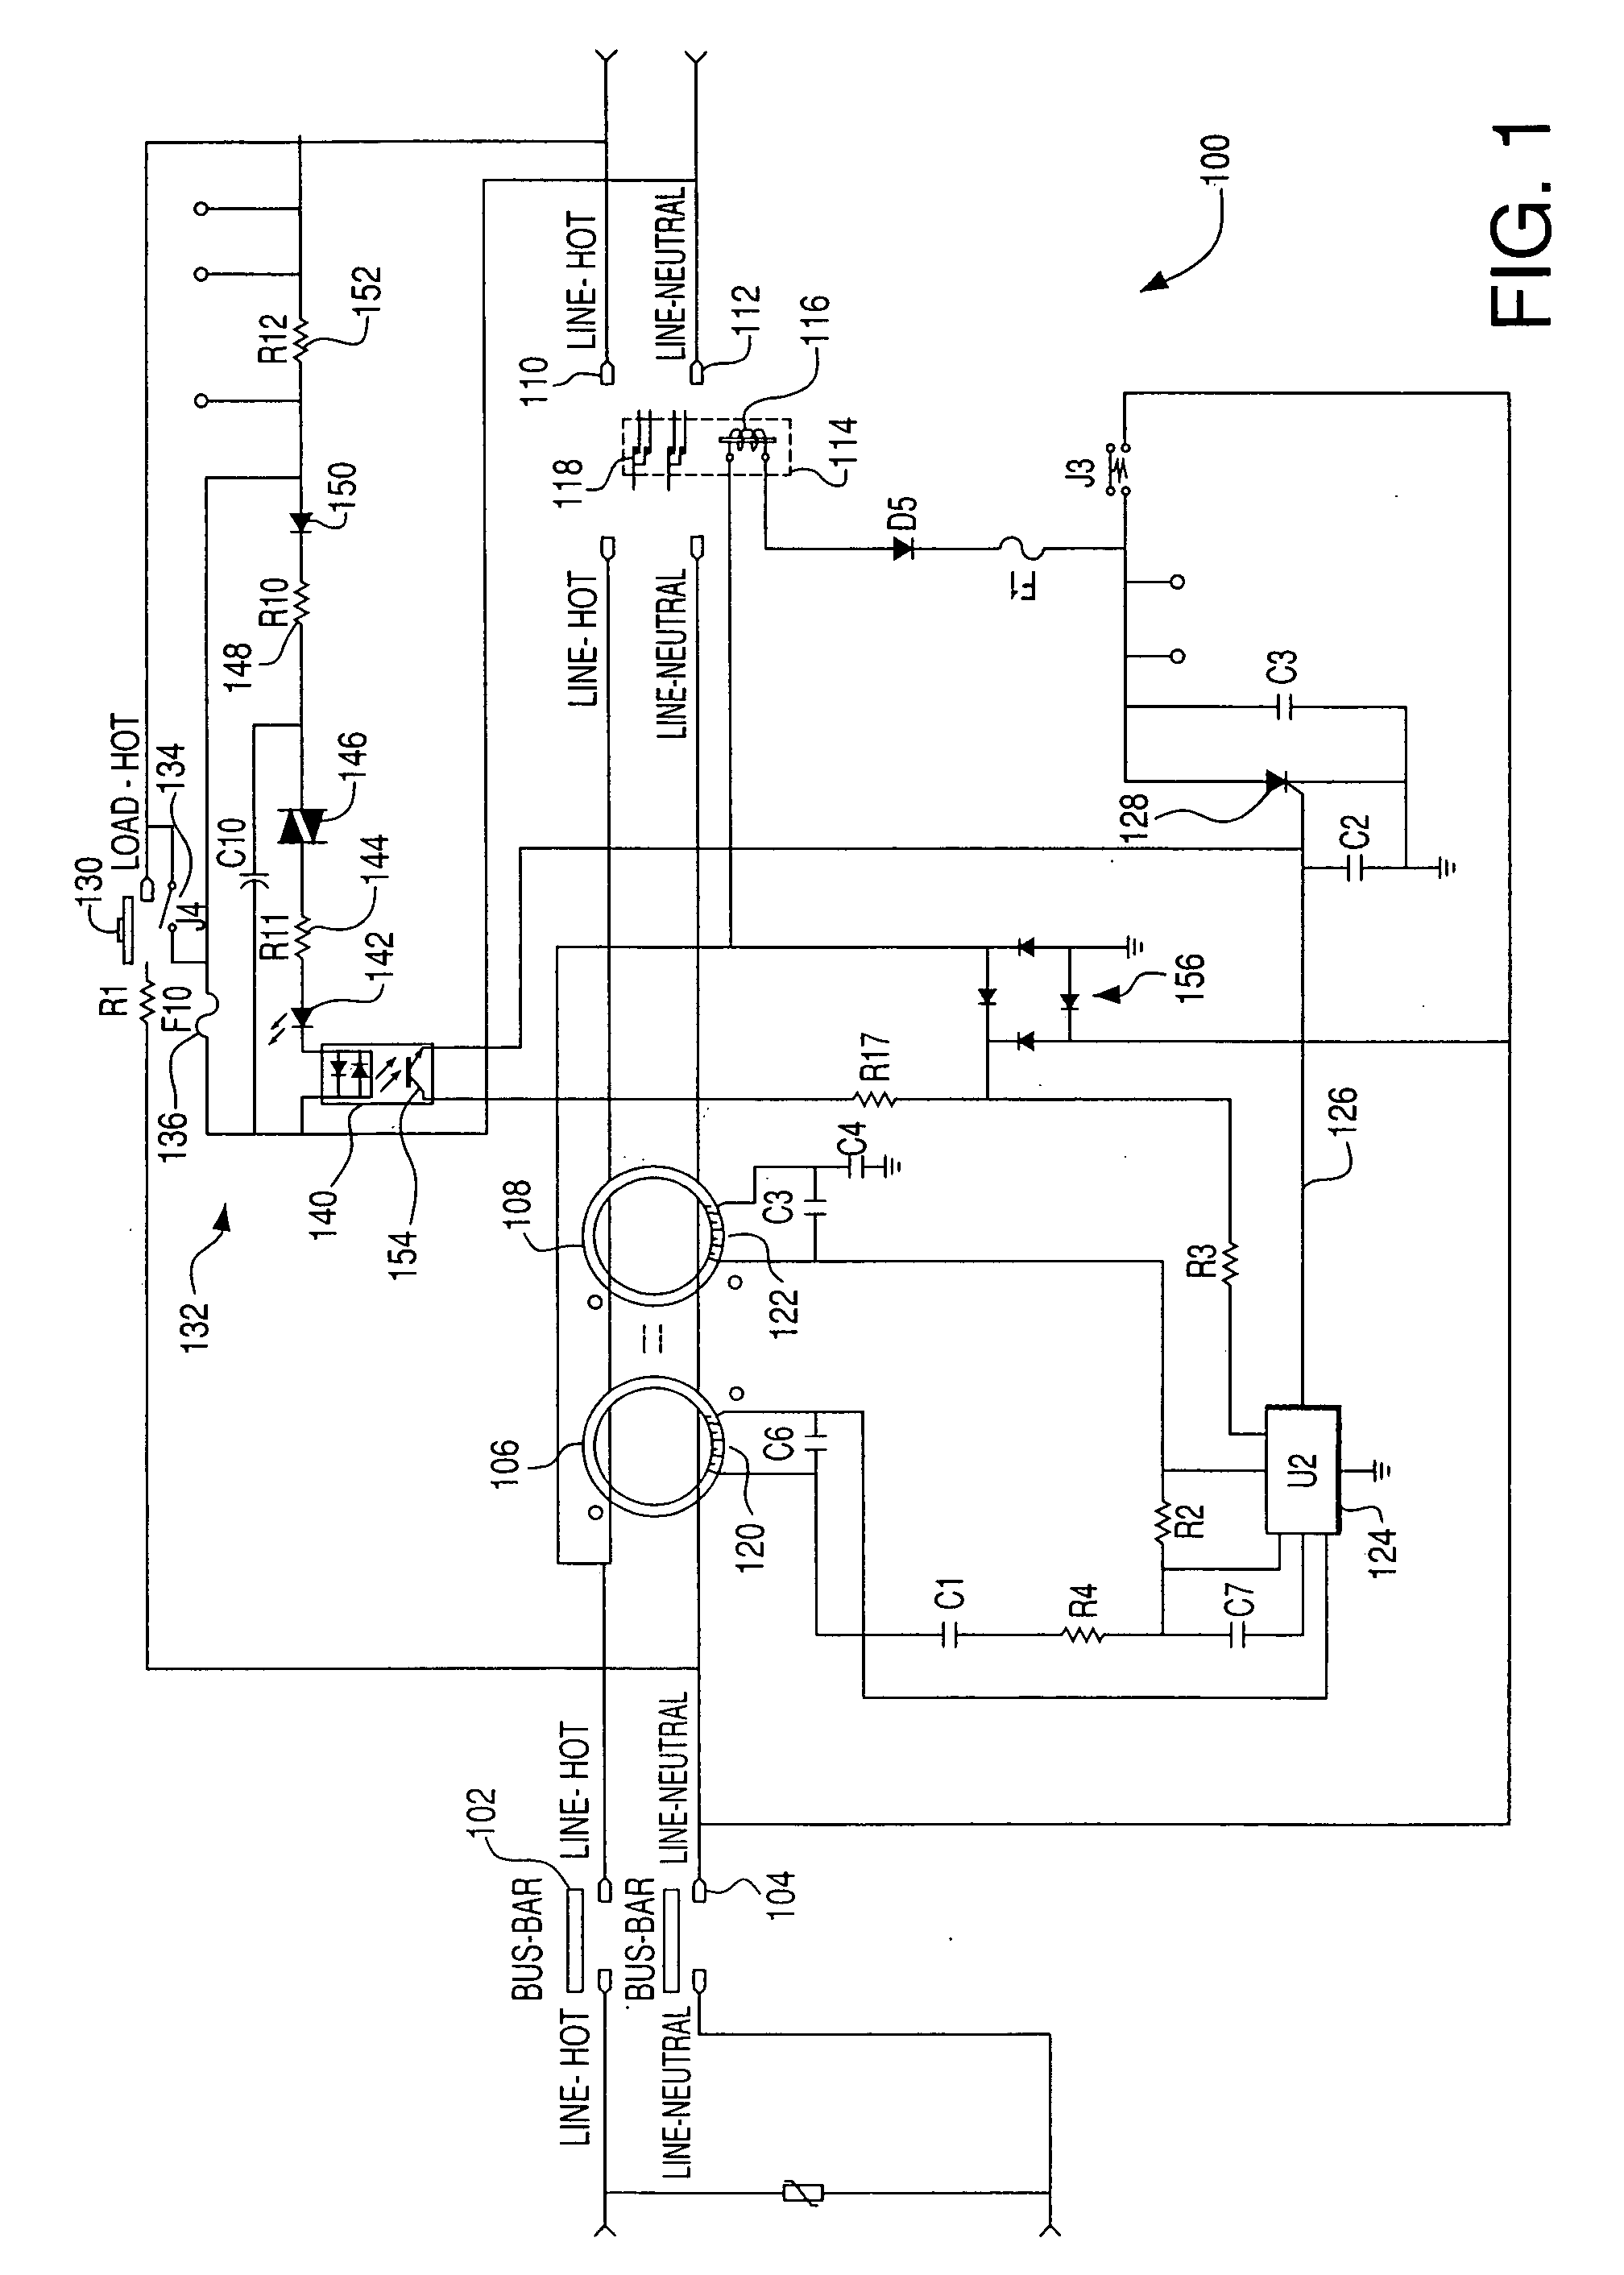 Ground fault circuit interruptor (GFCI) device having safe contact end-of-life condition and method of detecting same in a GFCI device